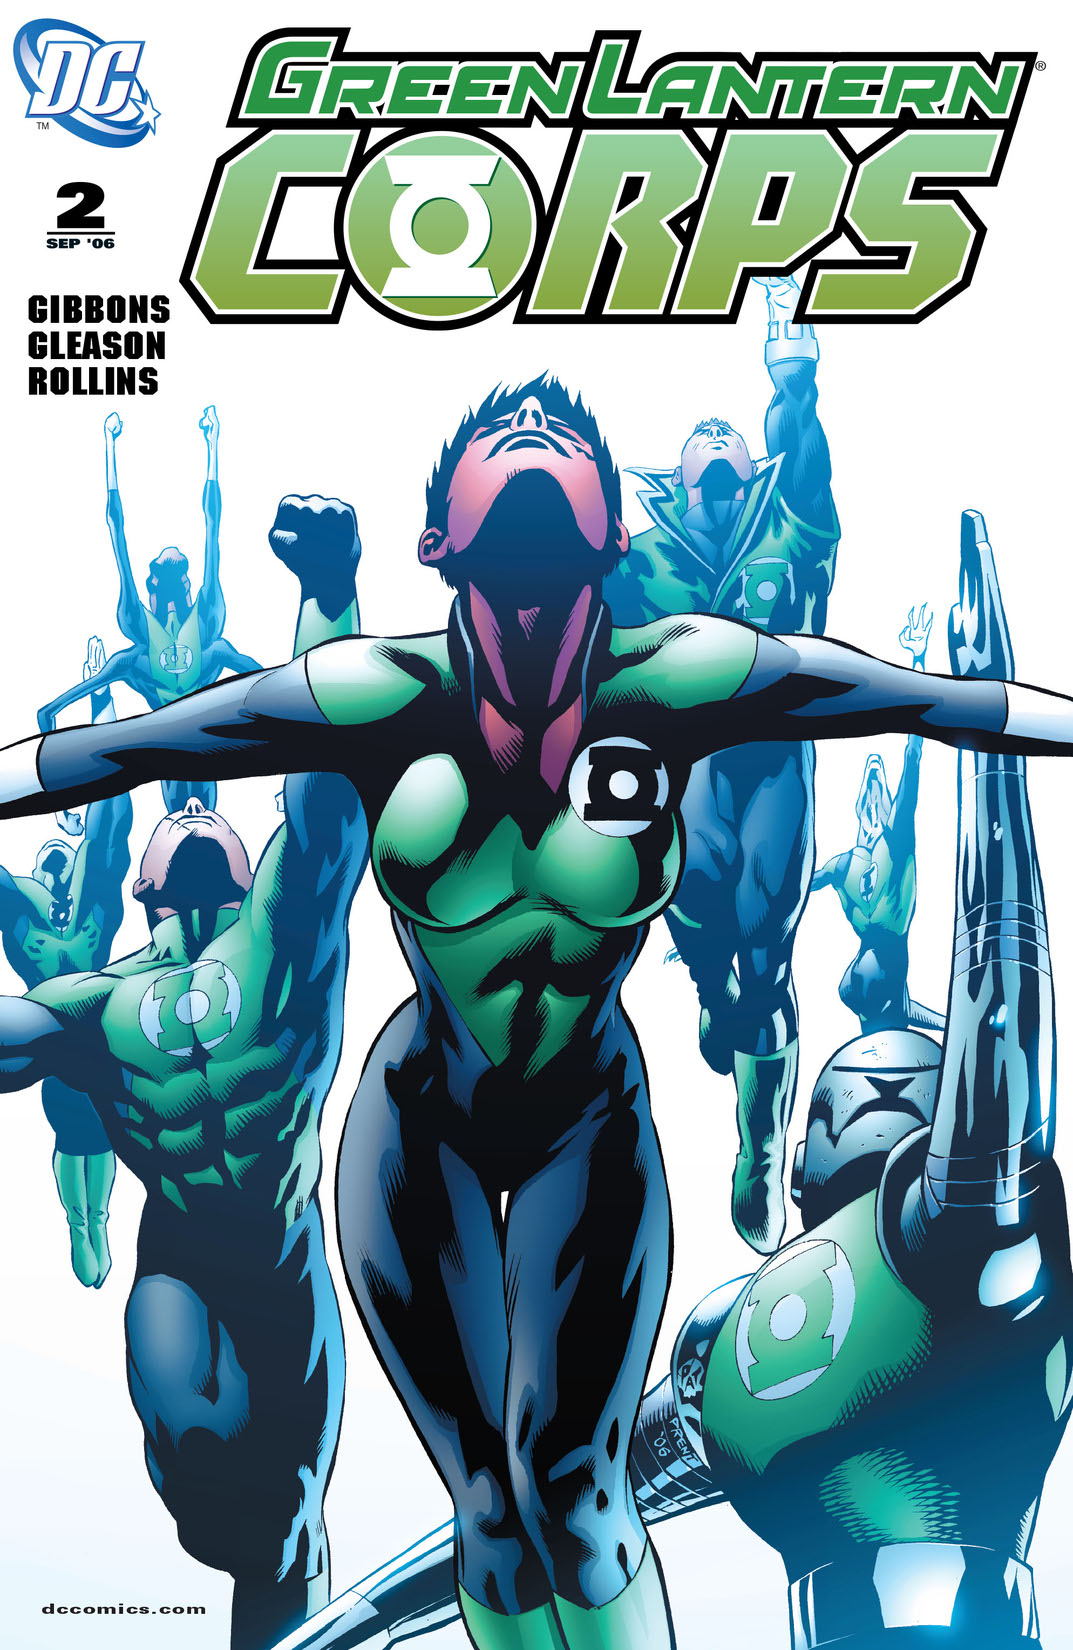 Green Lantern Corps (2006-) #2 preview images